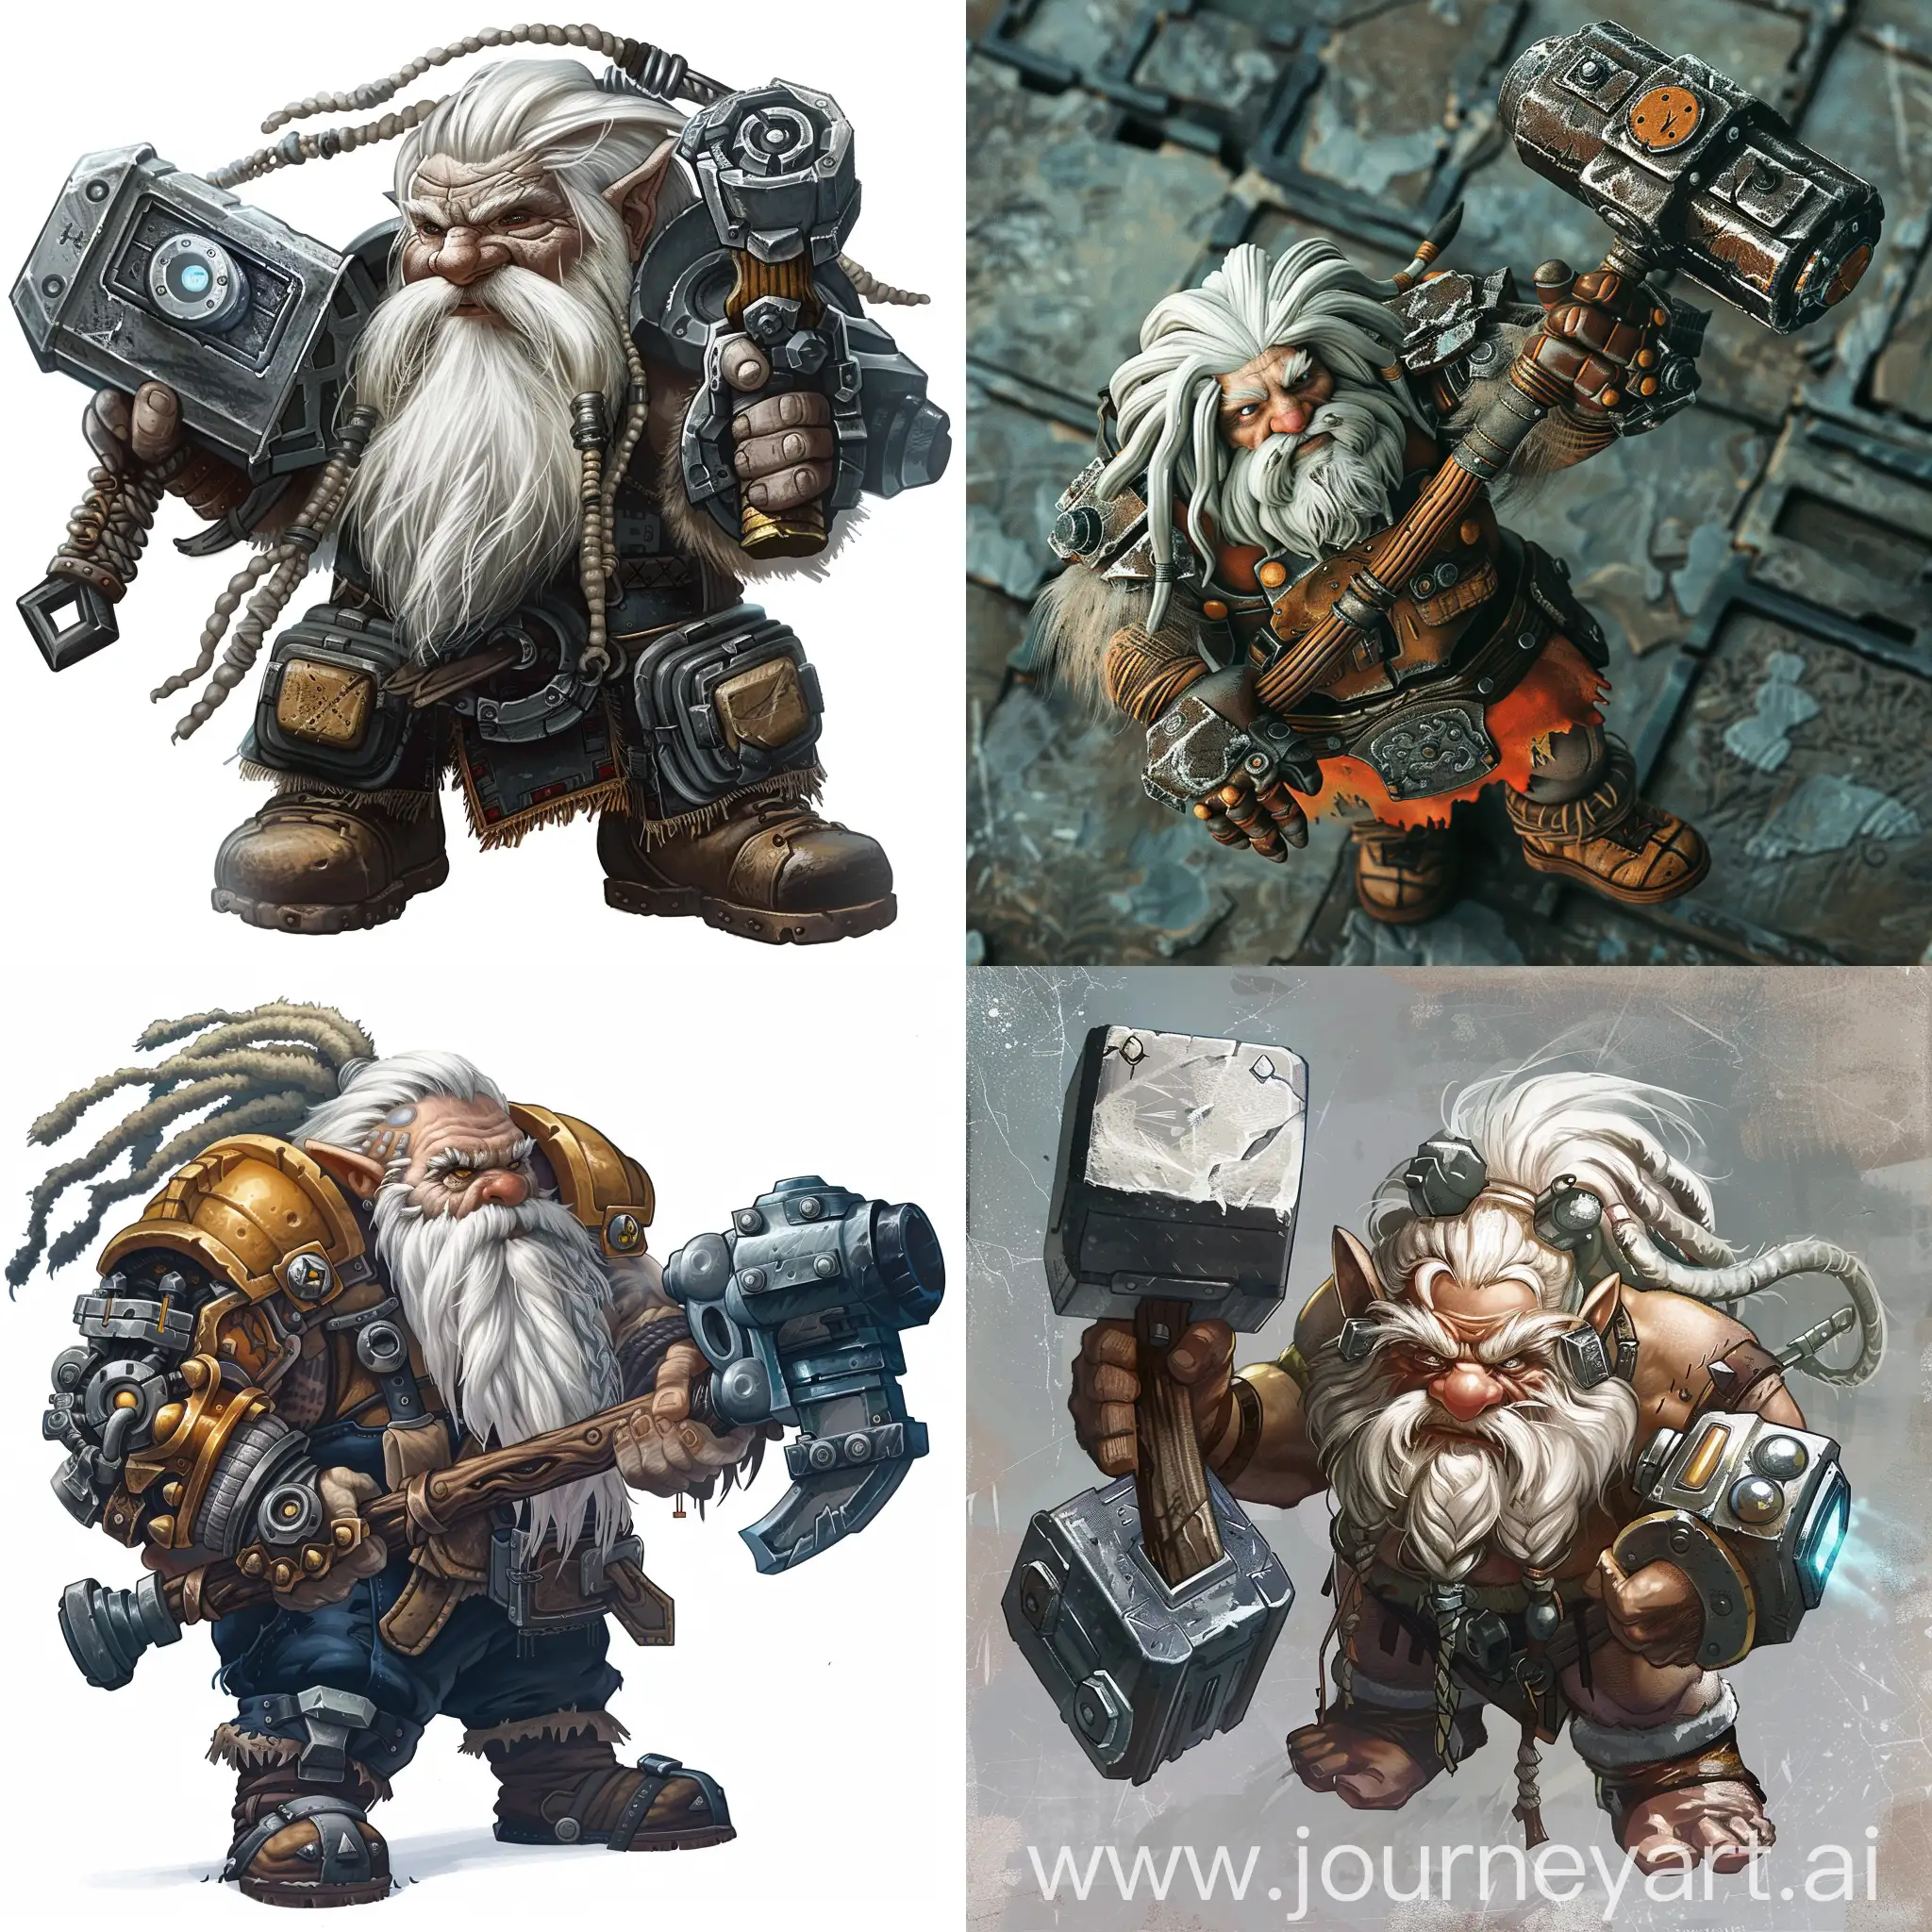 Dwarf-with-Metal-Arm-Wielding-Mechanical-Hammer-in-DND-TopDown-Style